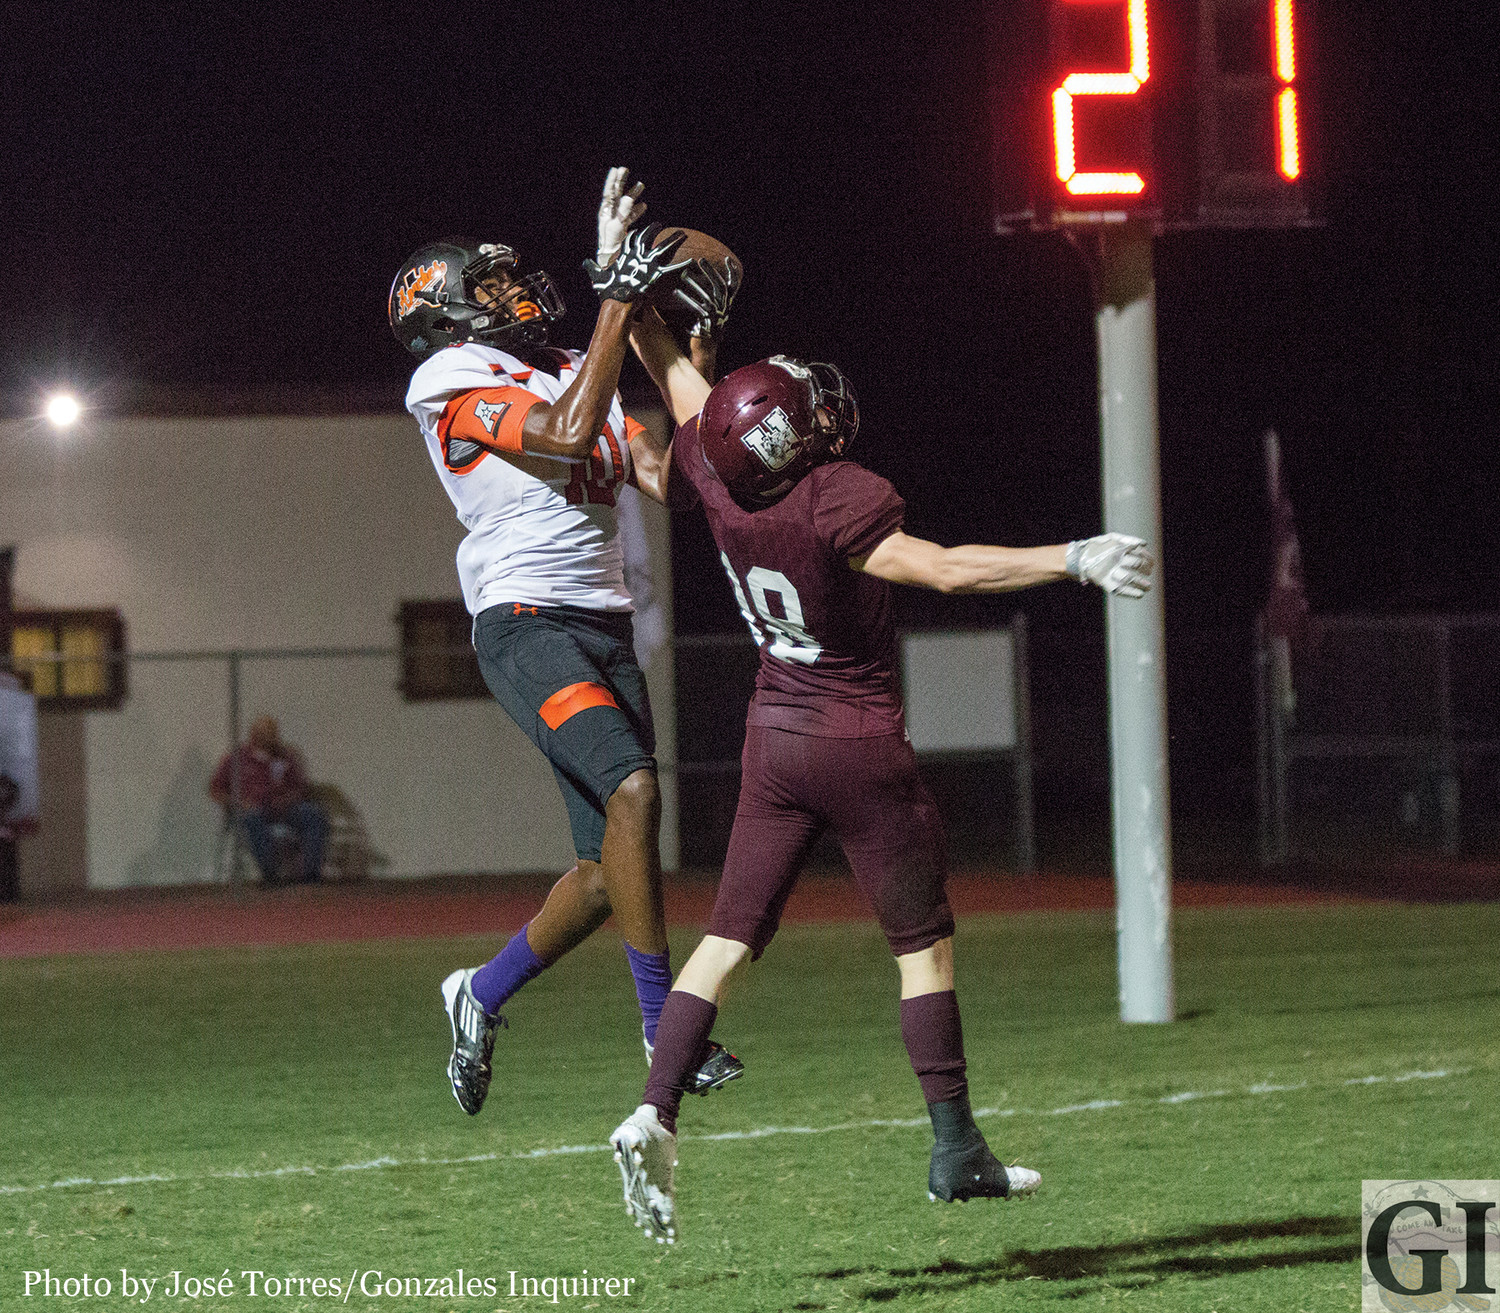 Trevion McNeil (10) snags a touchdown pass in the end zone during the Apaches’ 34-20 win.